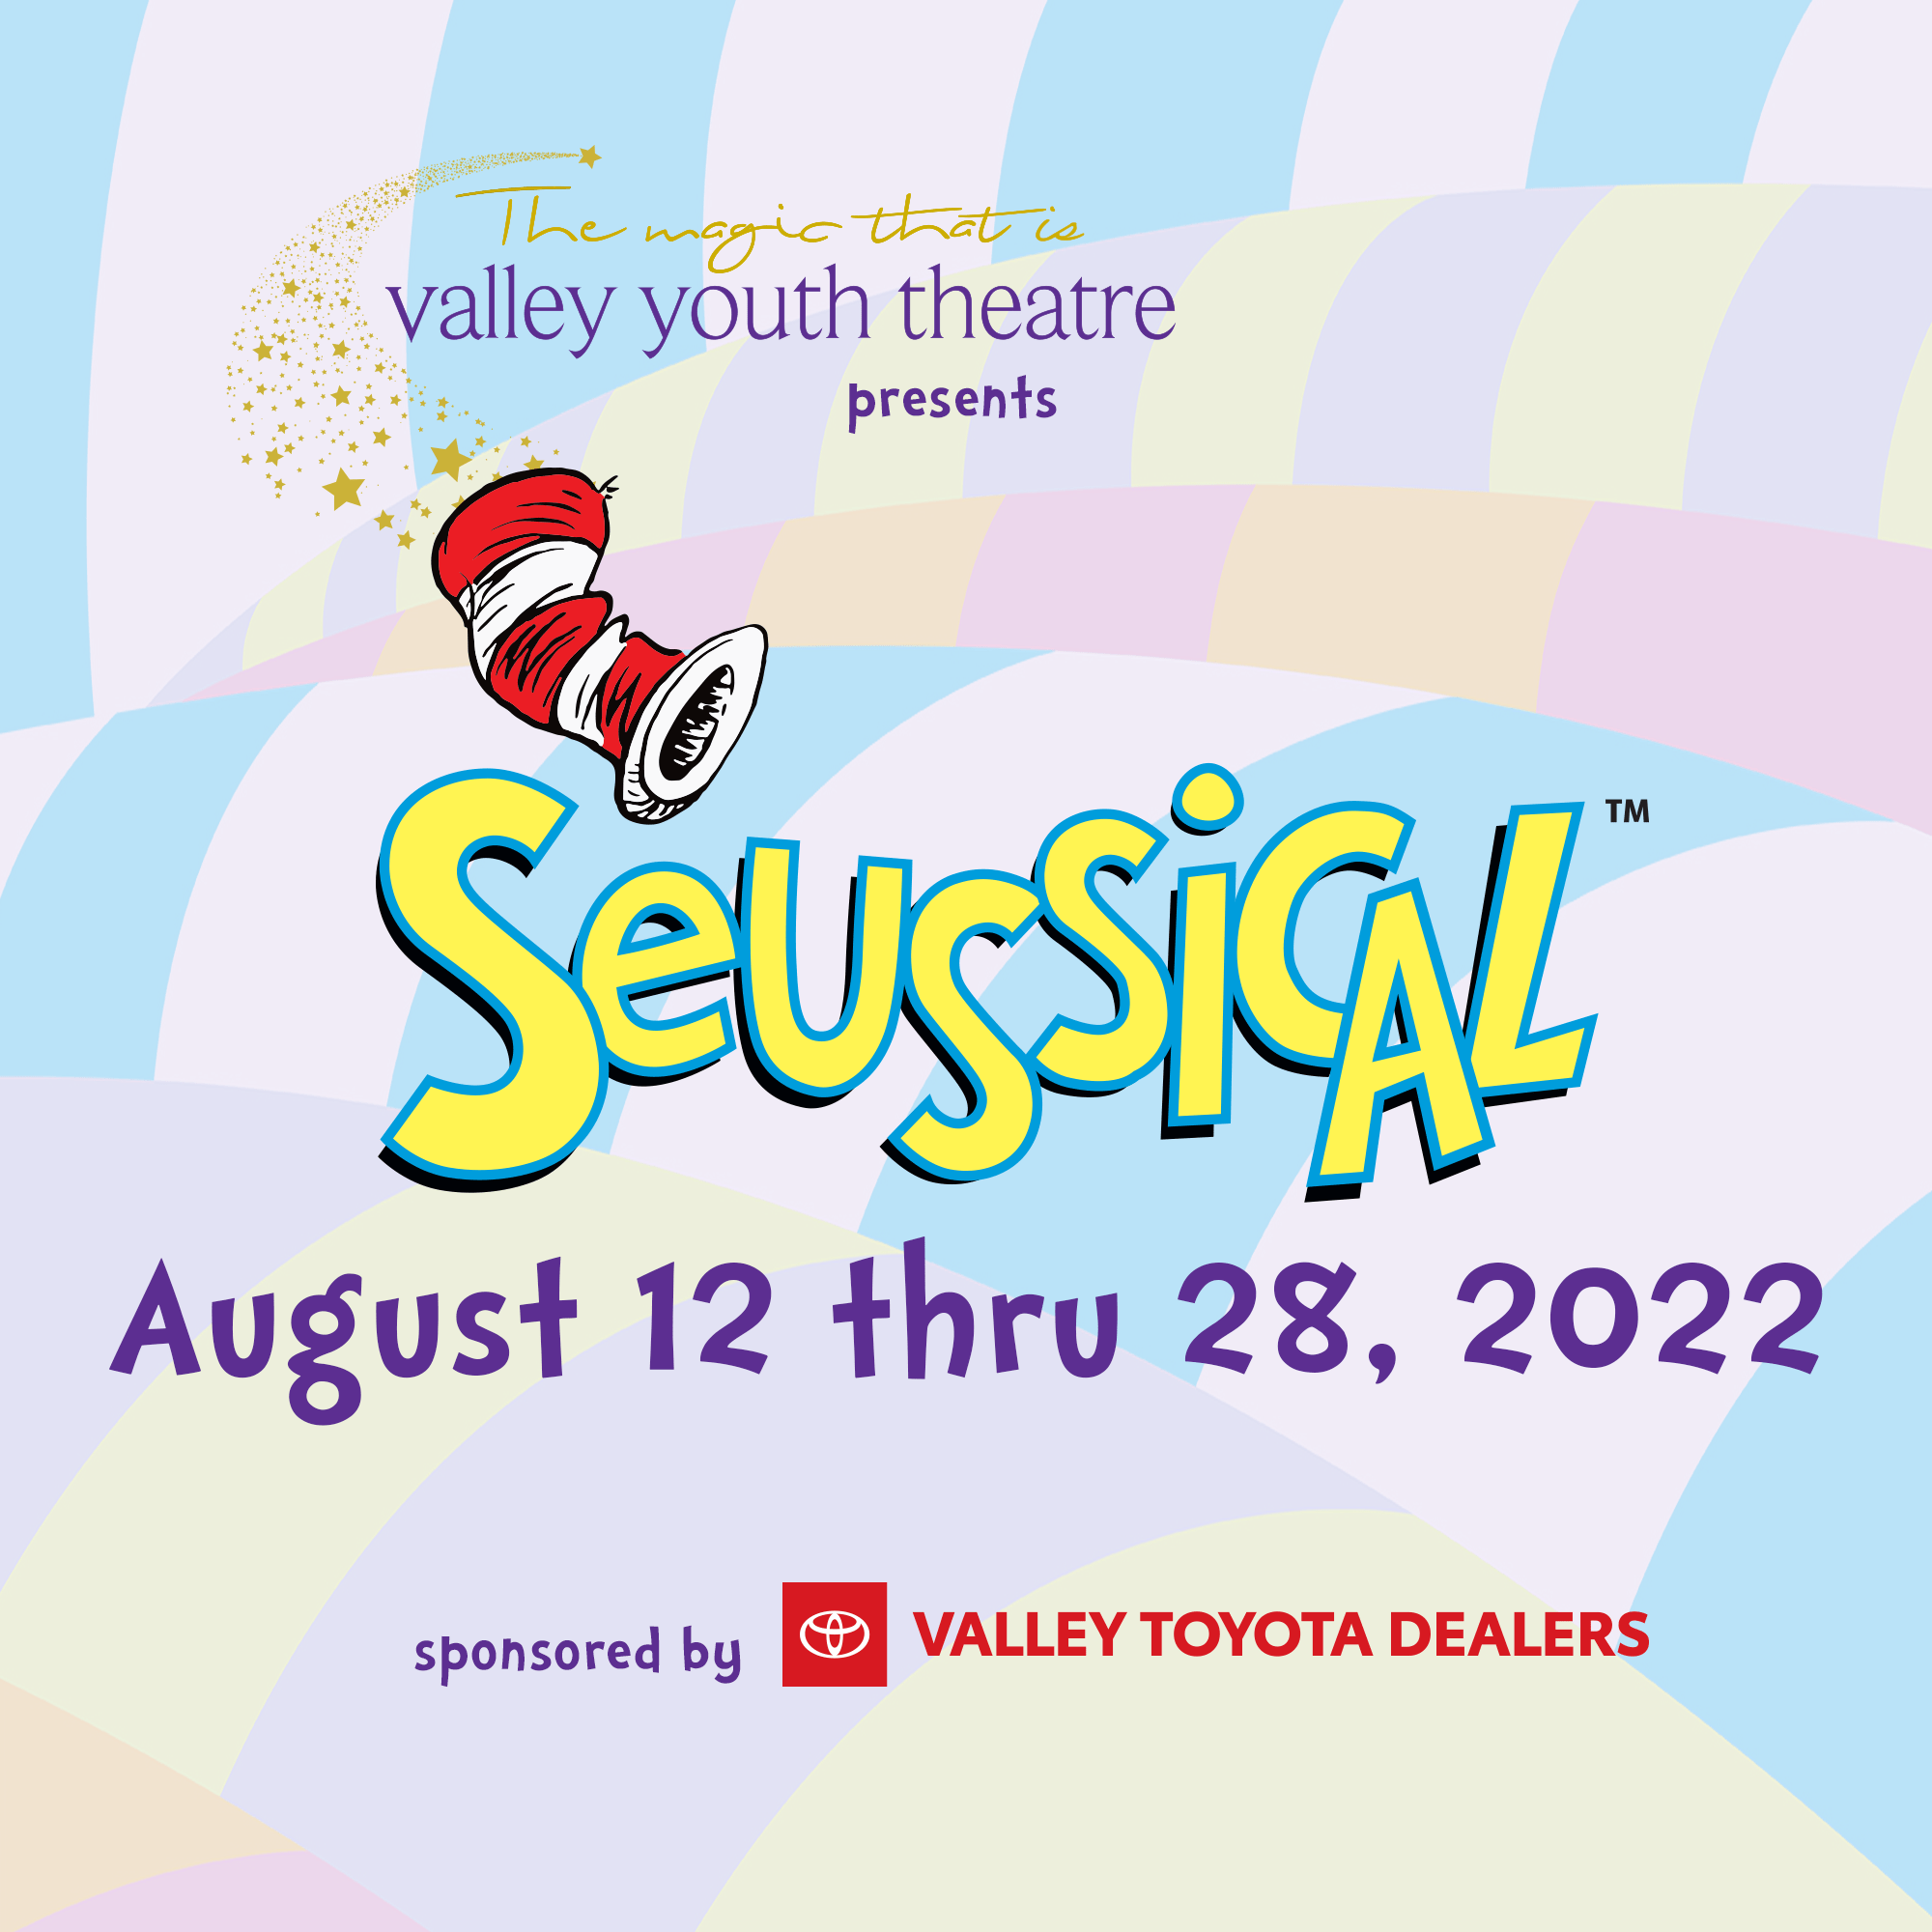 VYT’s Season Opener ‘Seussical’ hits Center Stage August 12